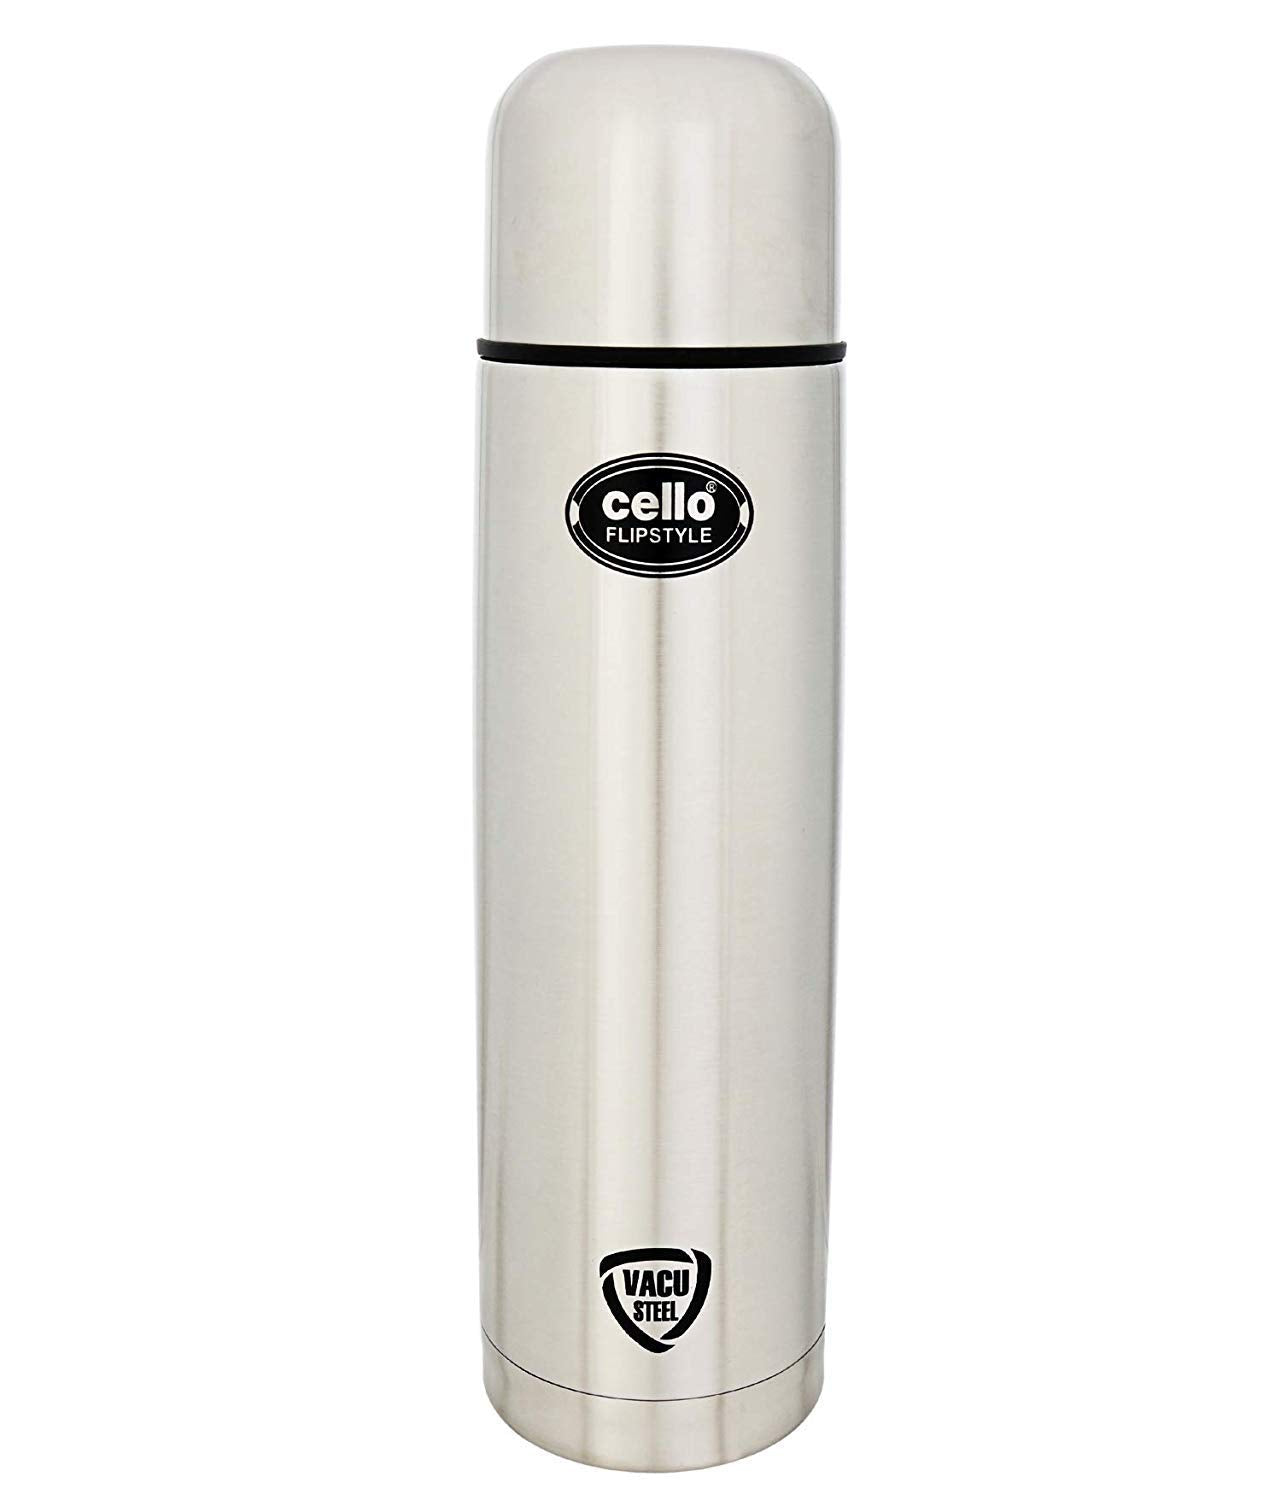 Cello Flip Style Stainless Steel Bottle with Thermal Jacket, 350ml, Silver